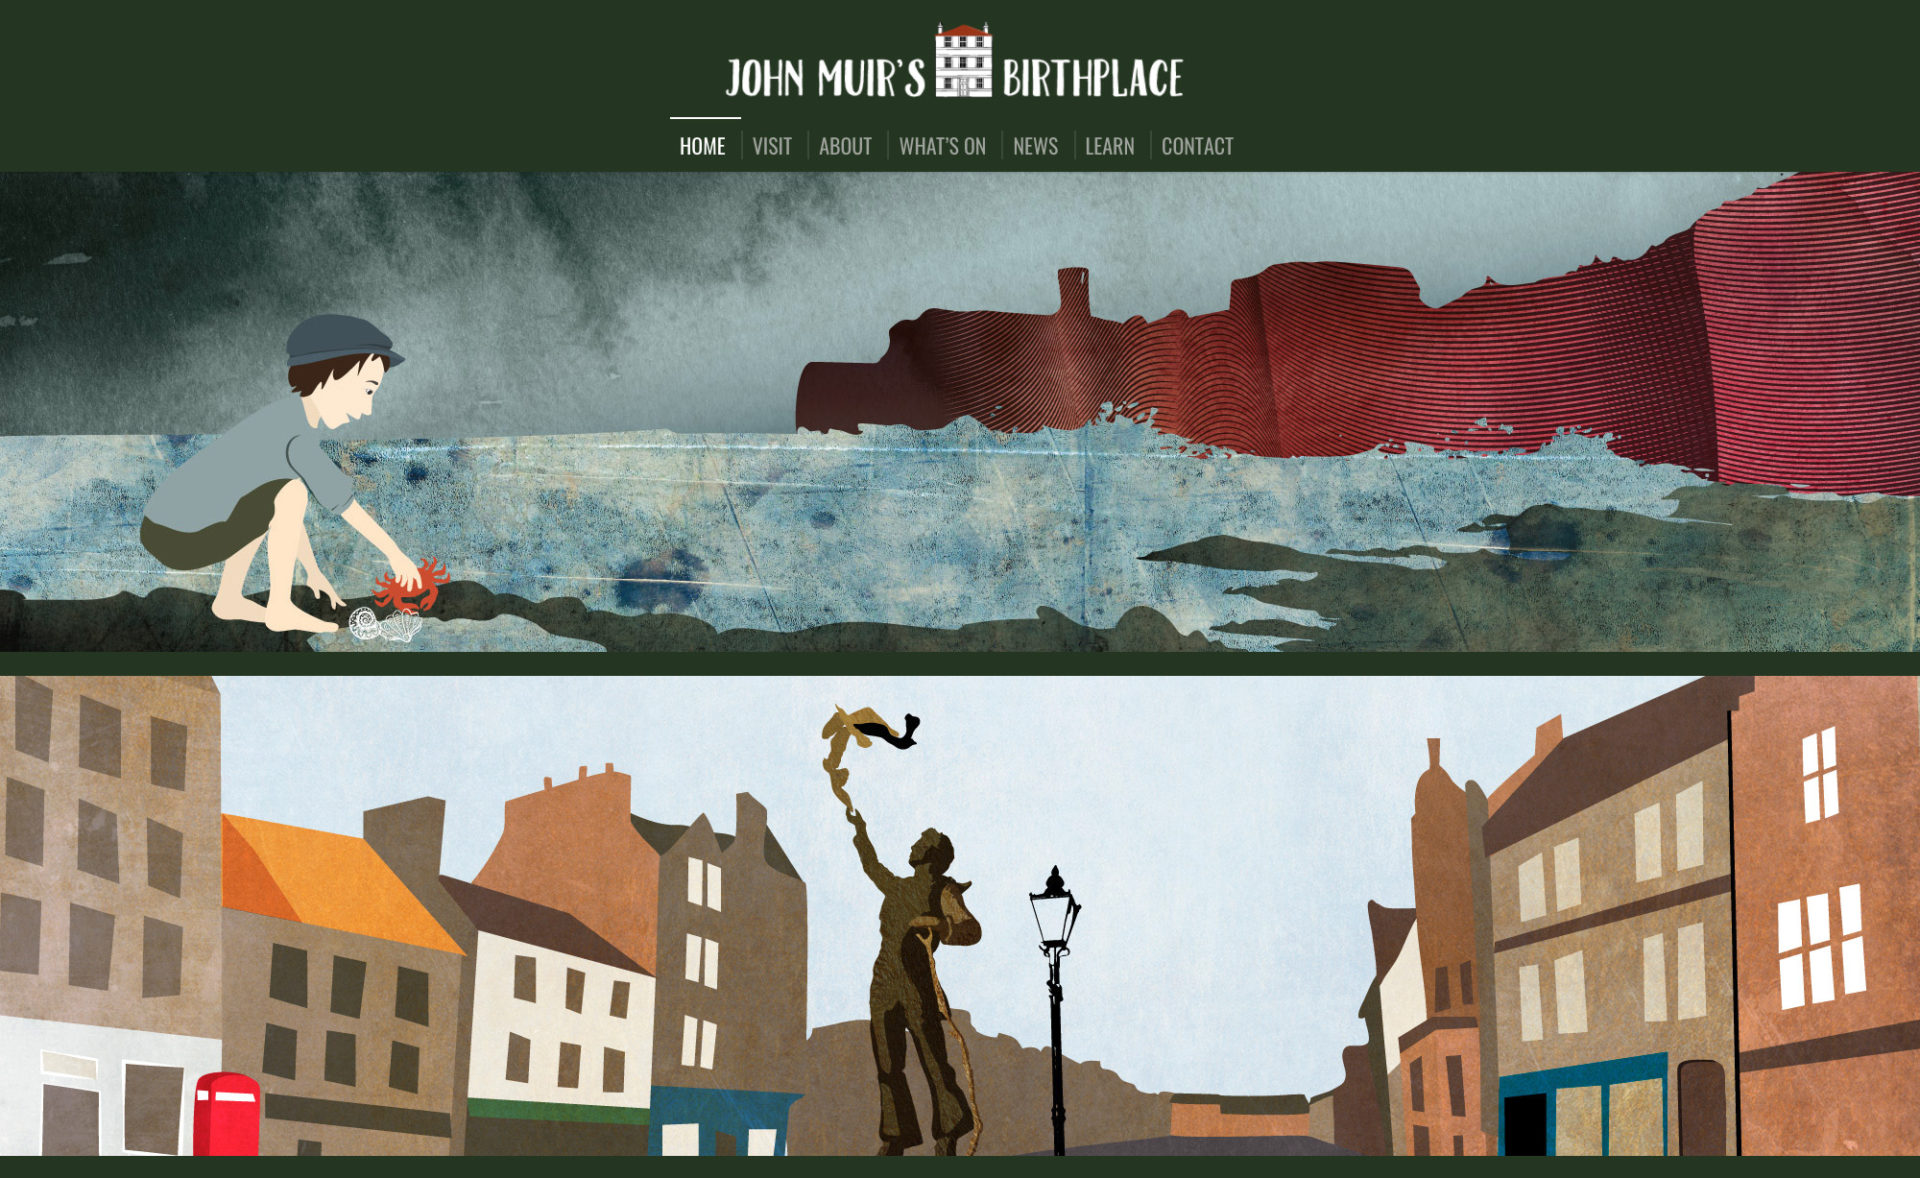 Illustration and design for John Muir Birthplace in Dunbar